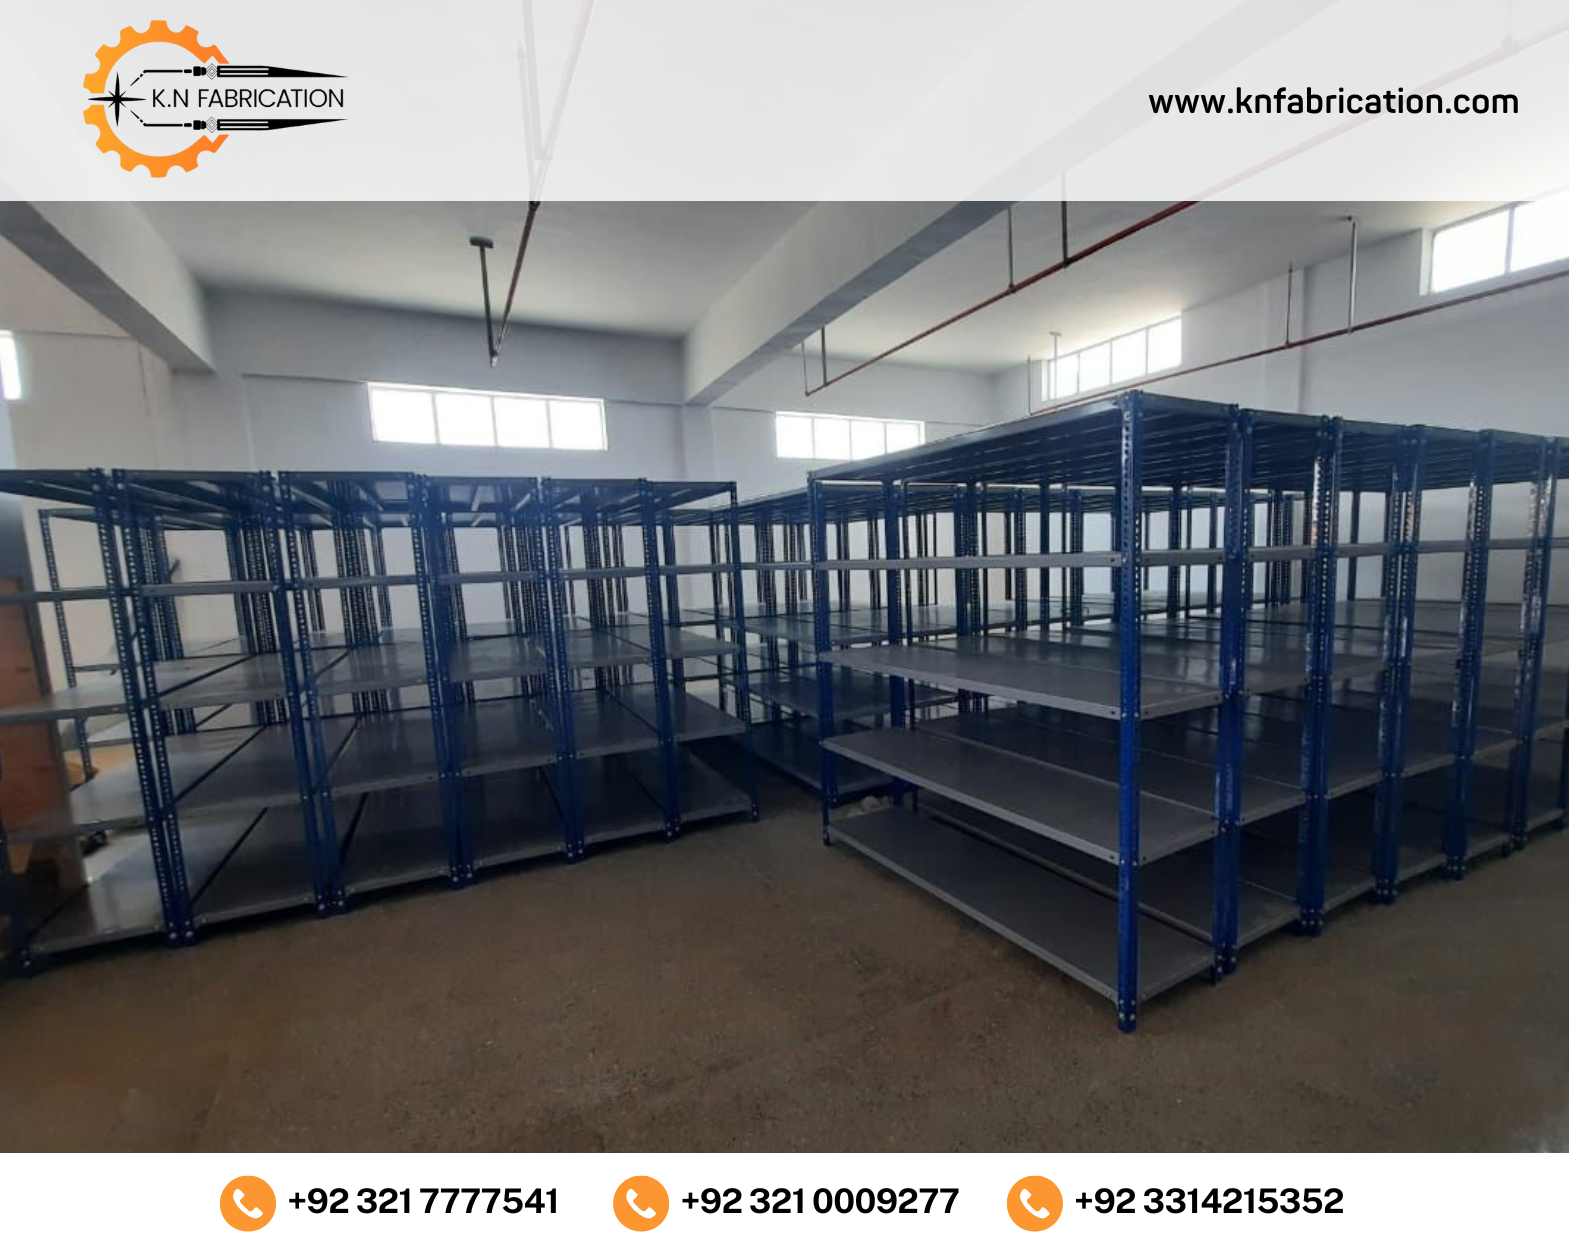 Premium slotted angle rack in Pakistan by KN Fabrication